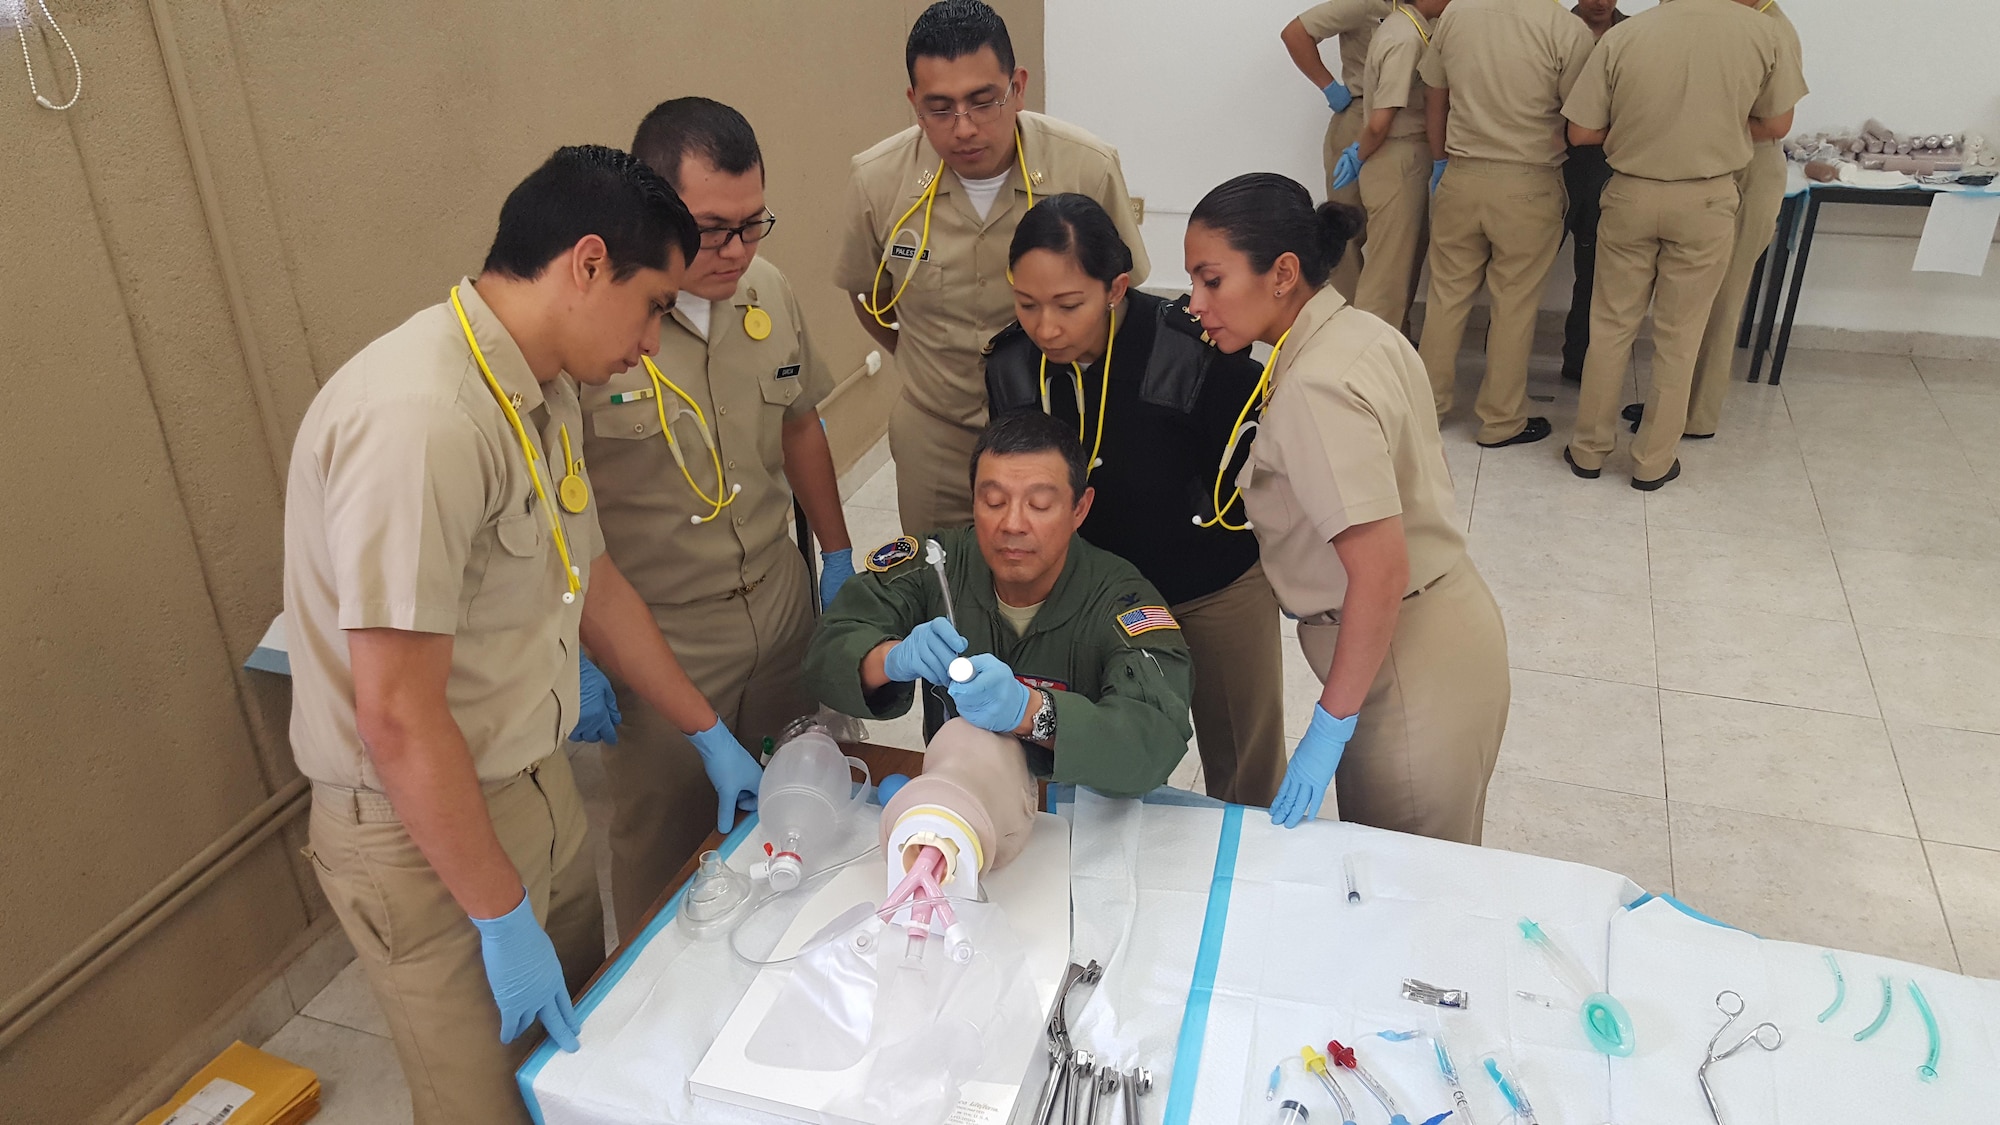 Col Antonio Delgado (pictured center), current Interim Director of AFMS International Health Specialist program, at an intubation station at CASEVAC training for Mexican Navy Medical Residents in Mexico City, Mexico. July 2016.